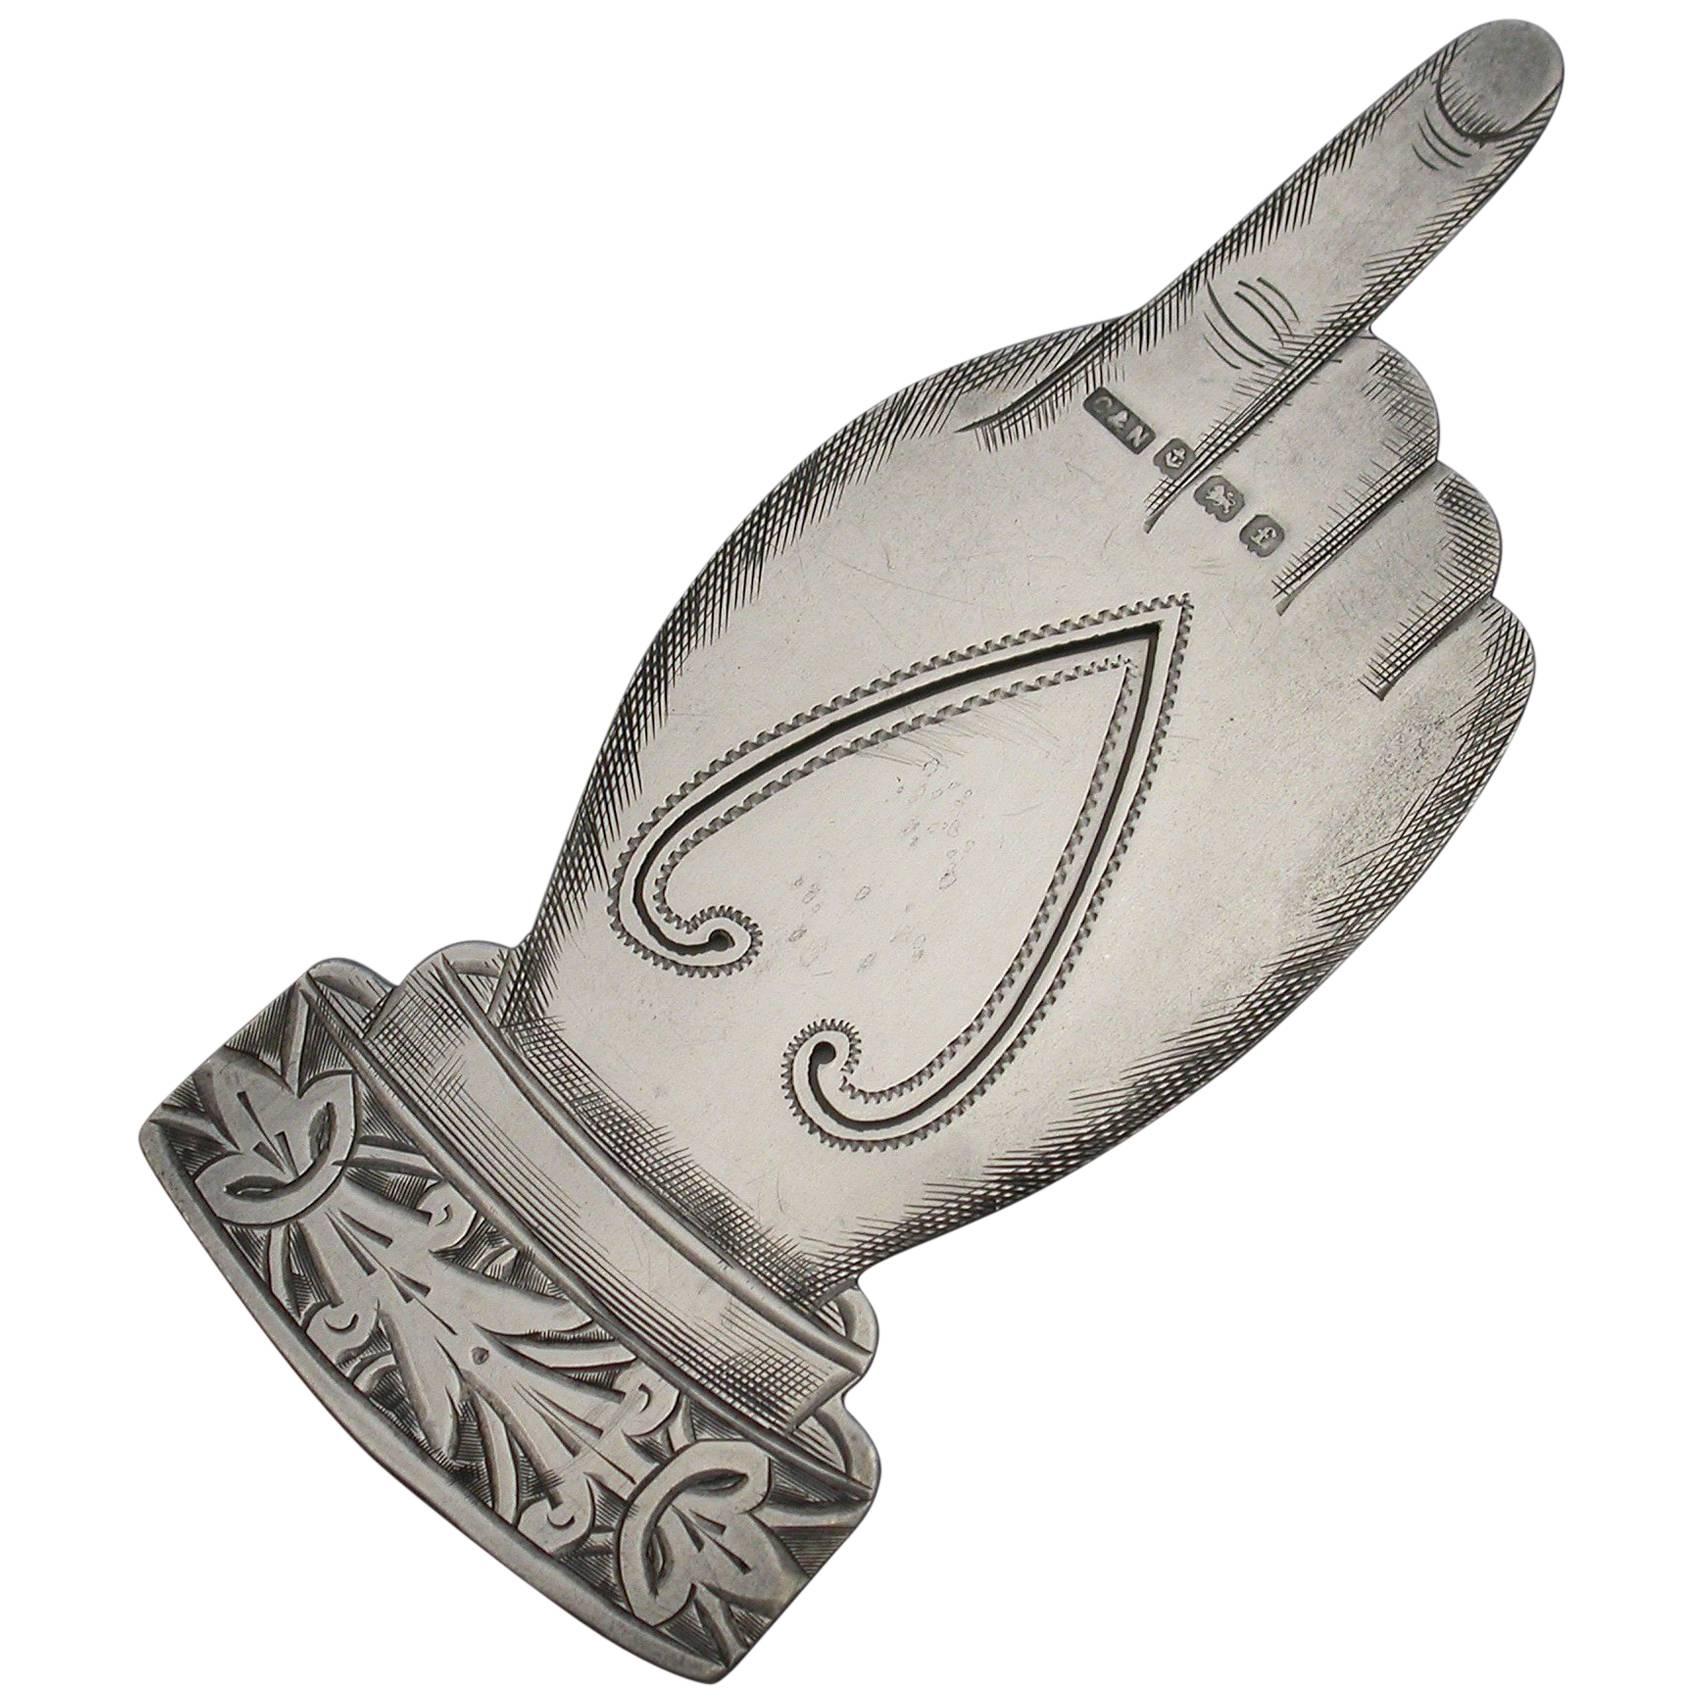 An Edwardian novelty silver bookmark modelled as a hand with a pointing index finger. Fine bright-cut engraved decoration to the cuff and lifelike engraving to the hand itself.

By Crisford & Noris, Birmingham, 1905

In good condition with no